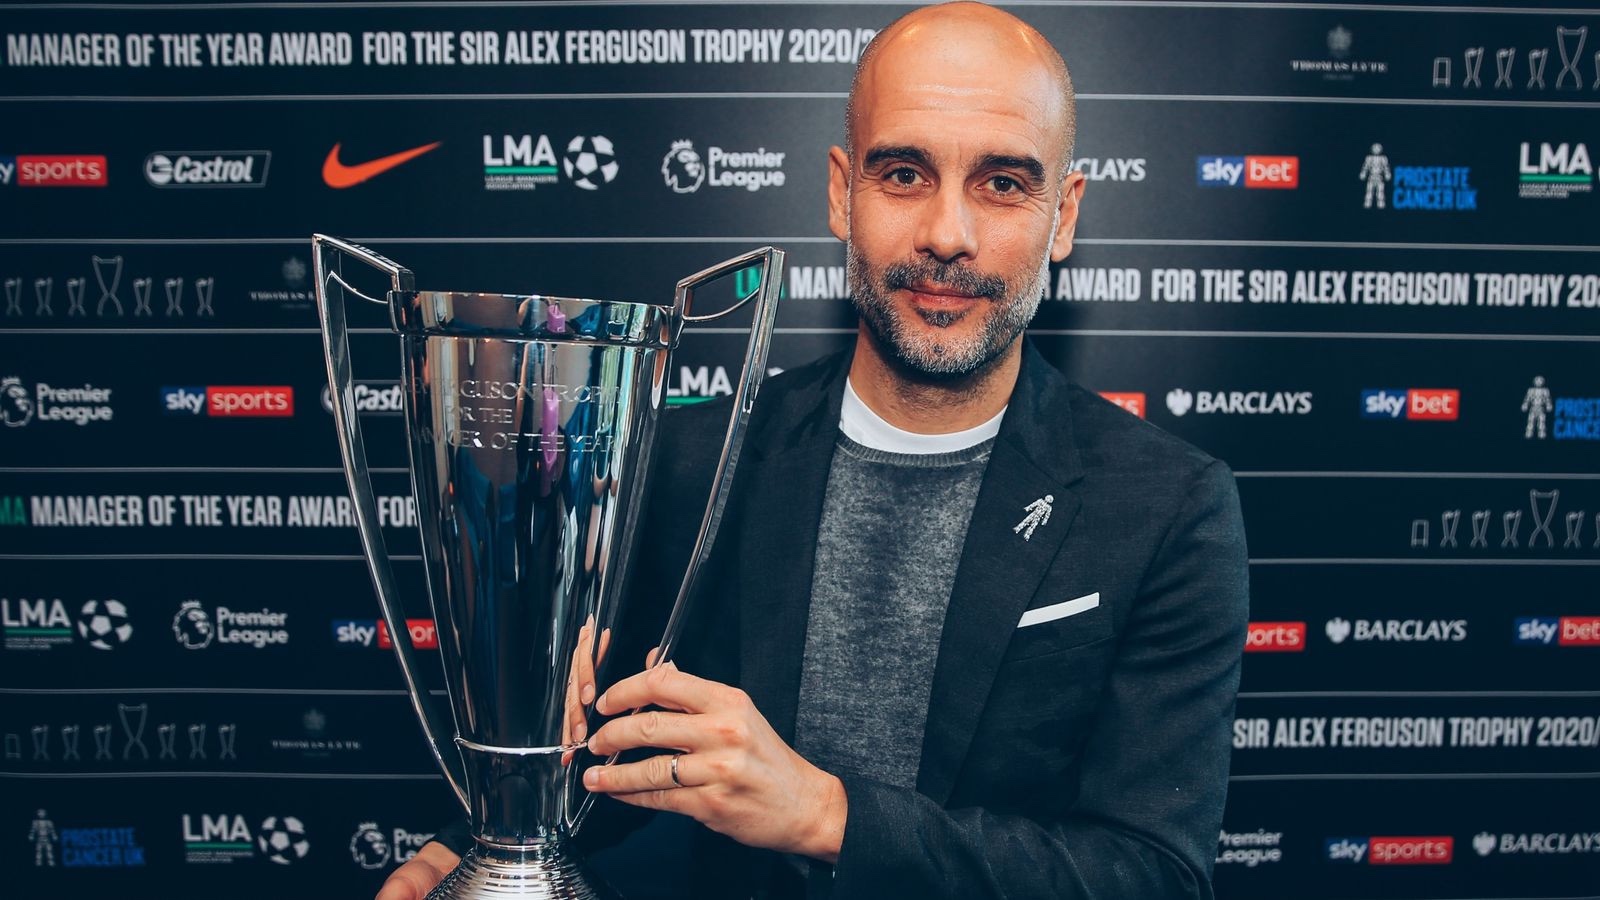 Manchester City boss Pep Guardiola named LMA Manager of the Year